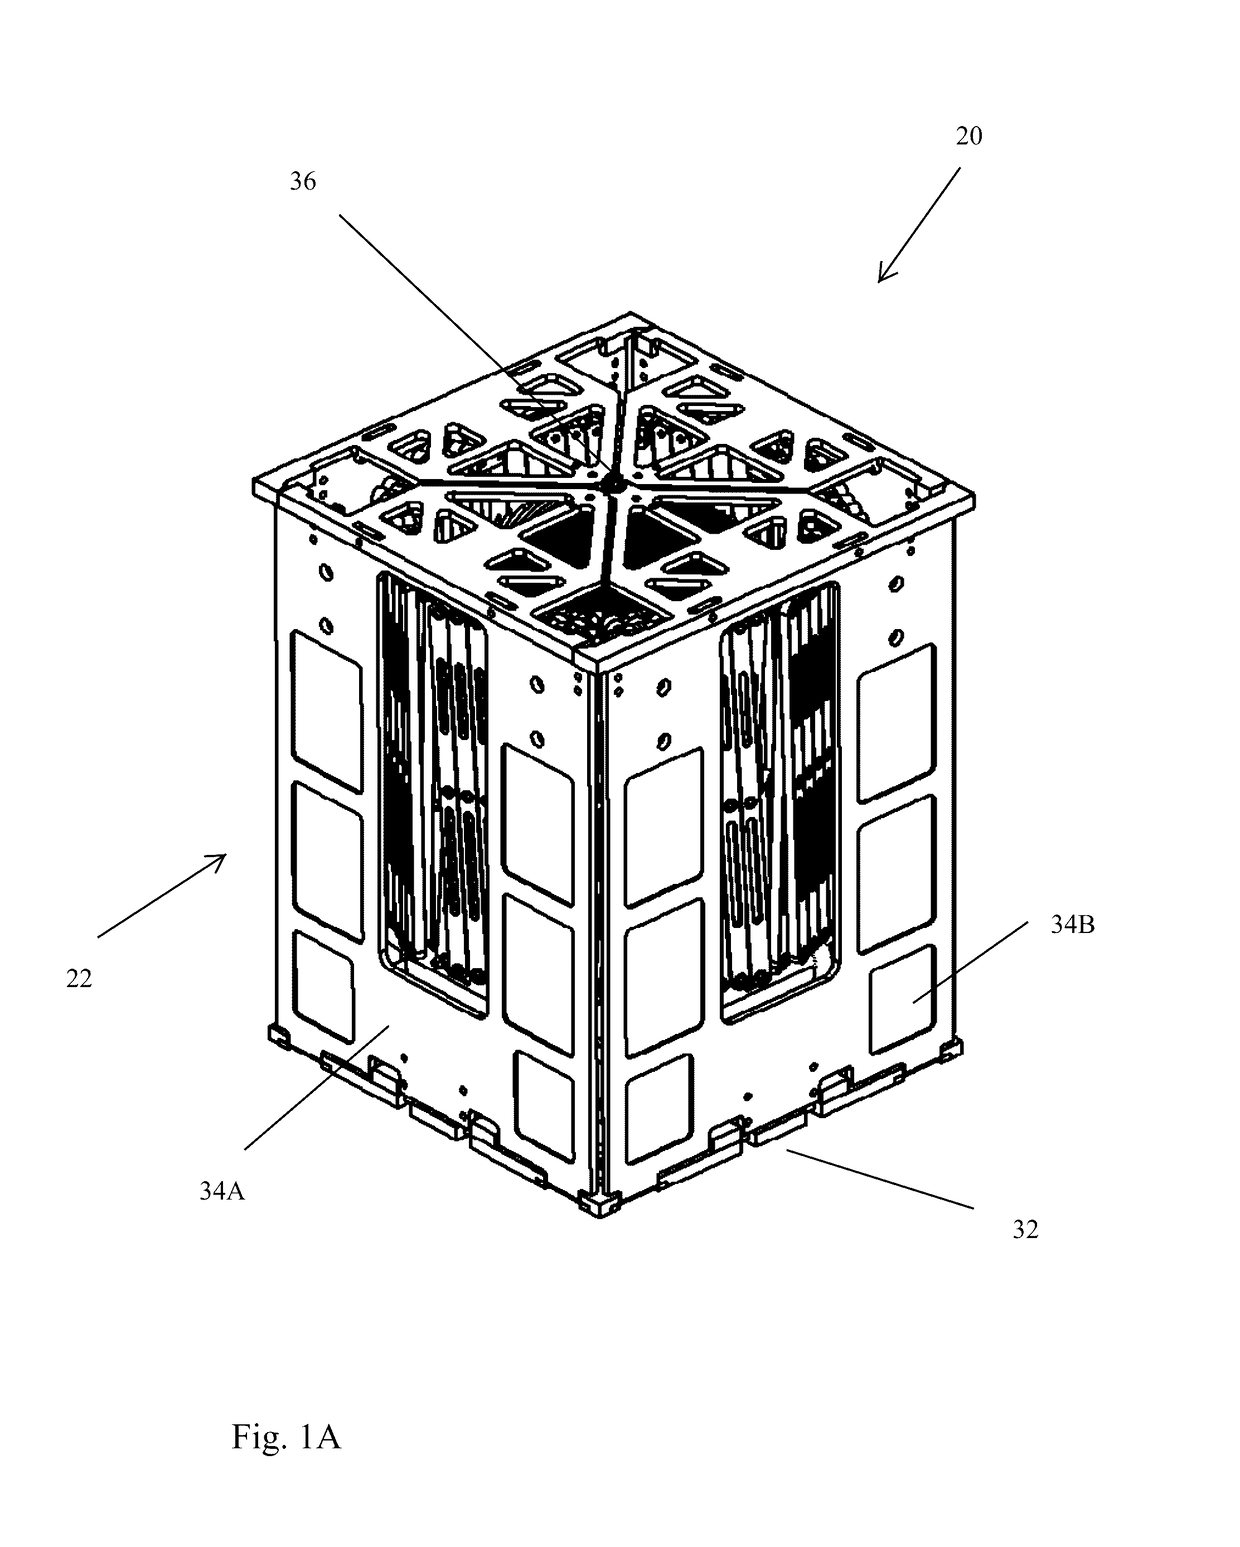 Deployable Structure for Use in Establishing a Reflectarray Antenna